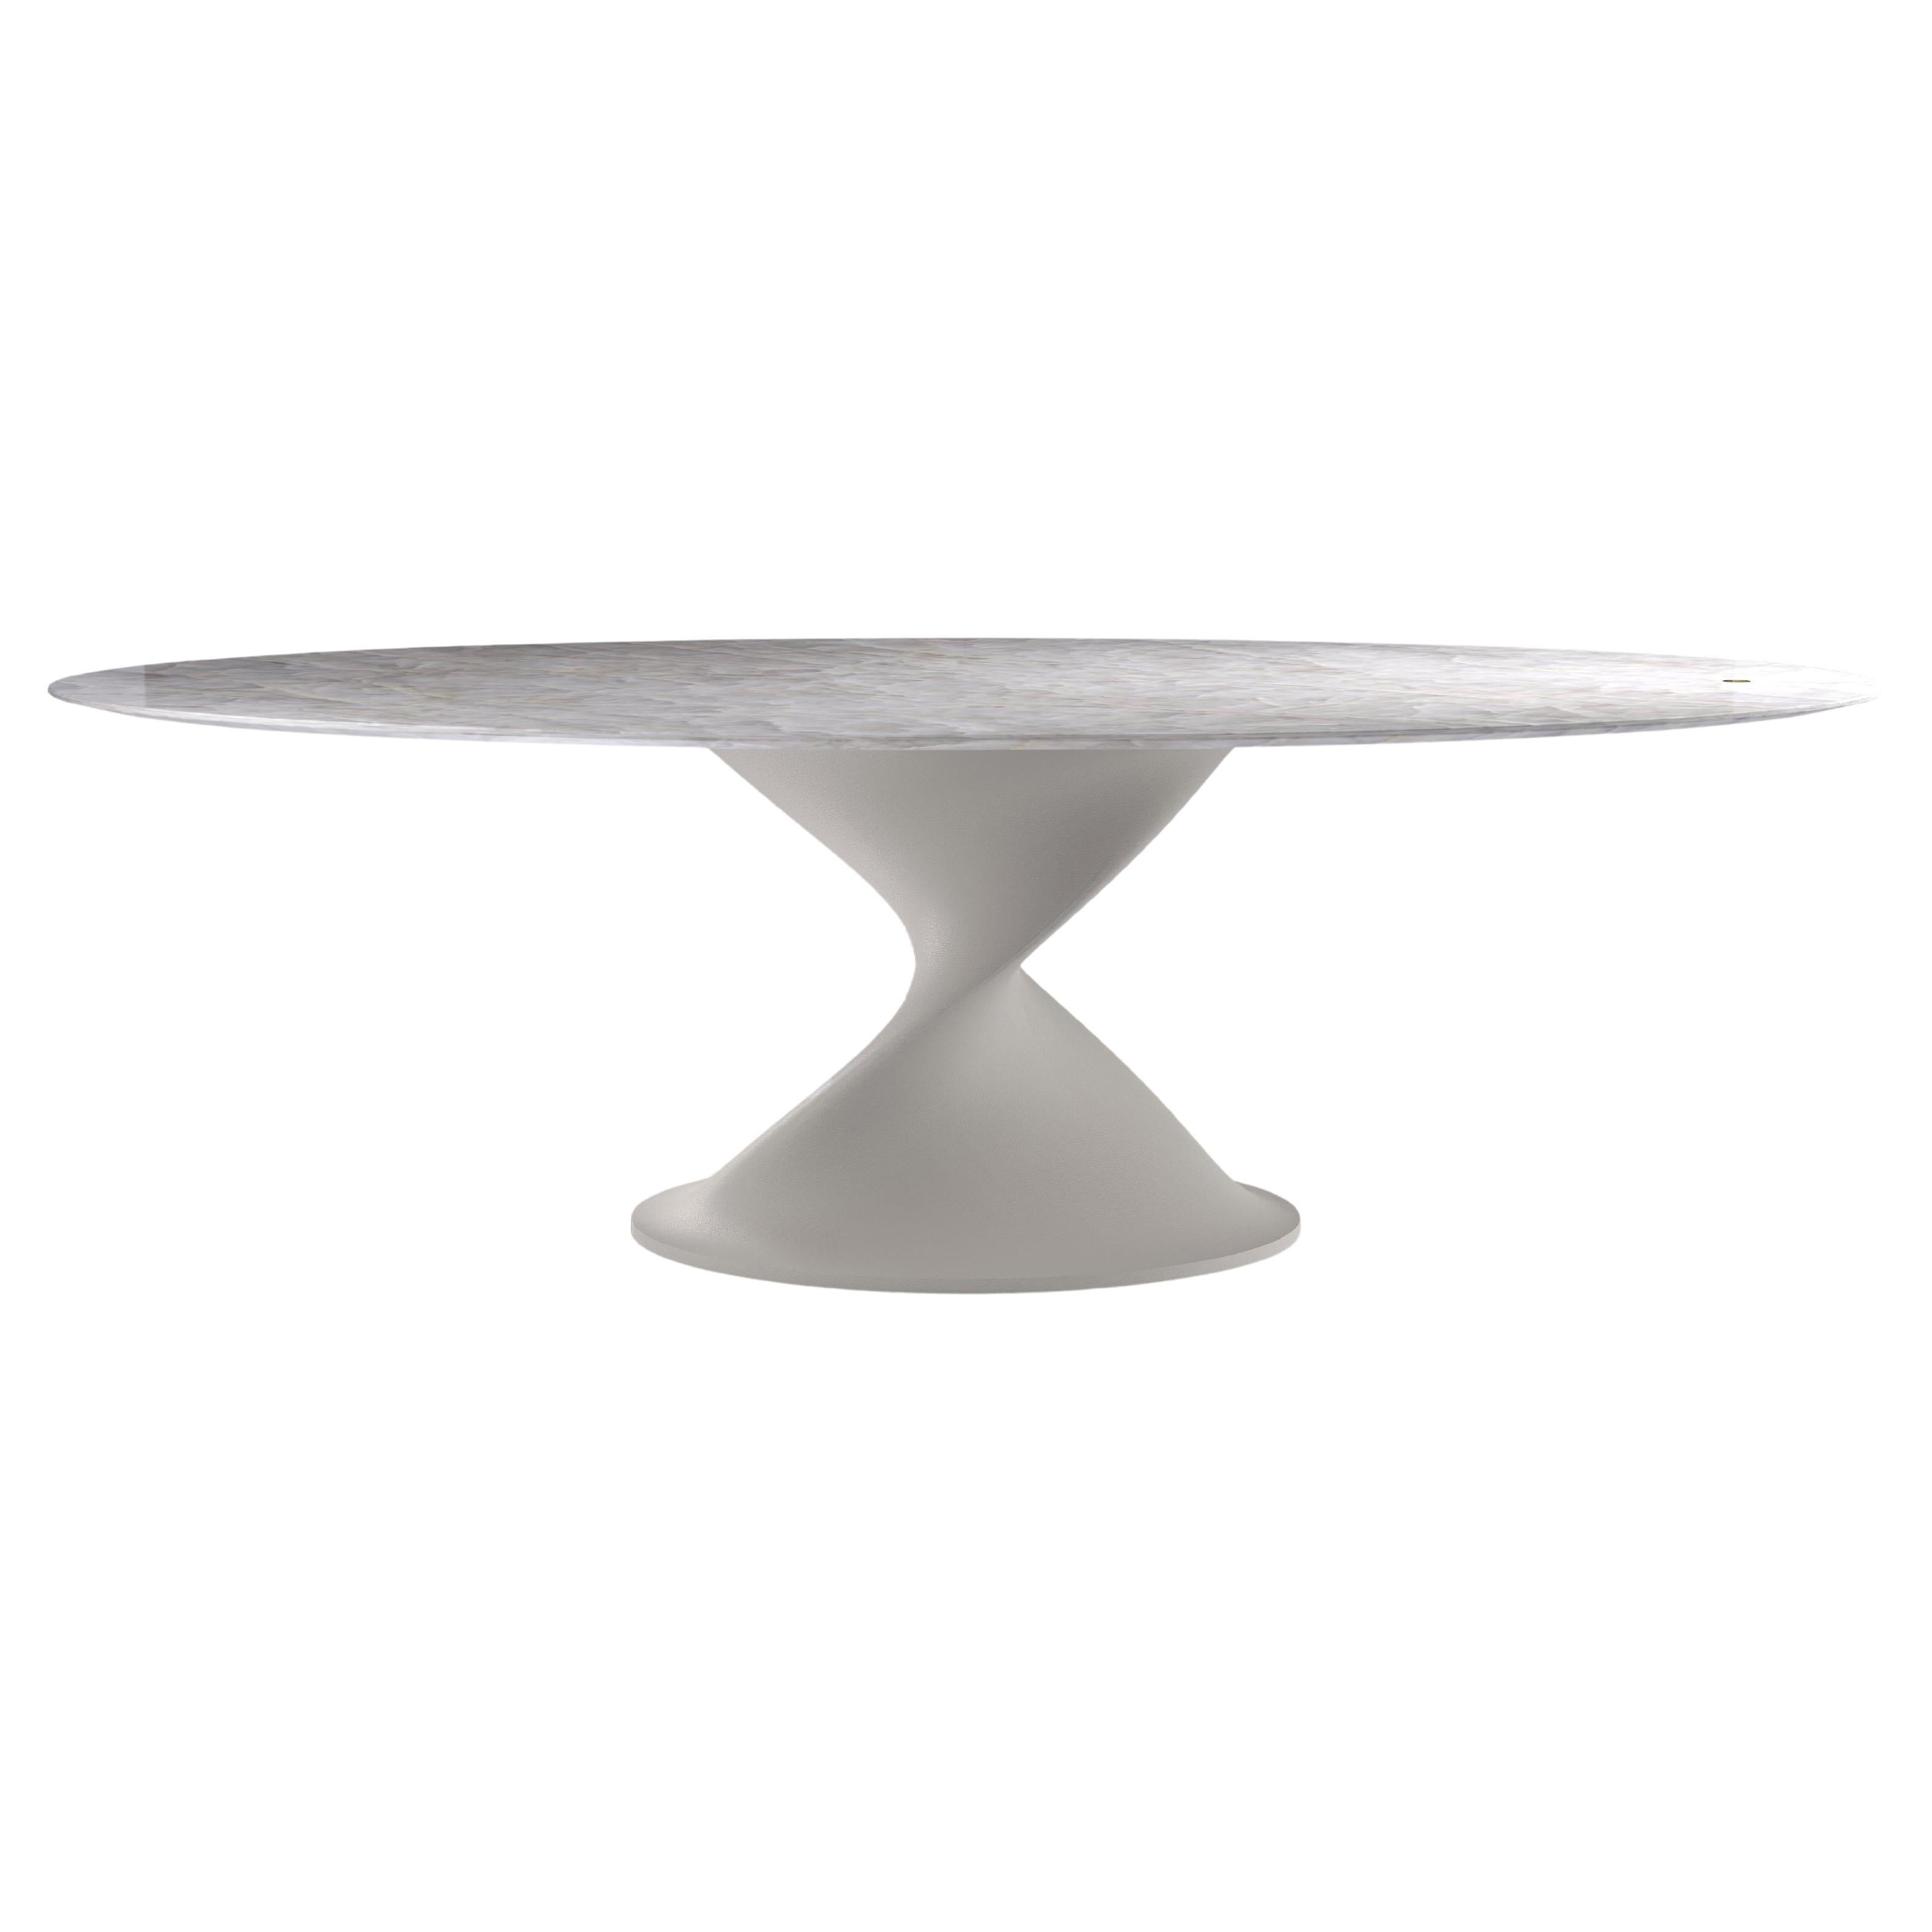 Glissando Contemporary Quartzite Dining Table in Leather by Mansi London